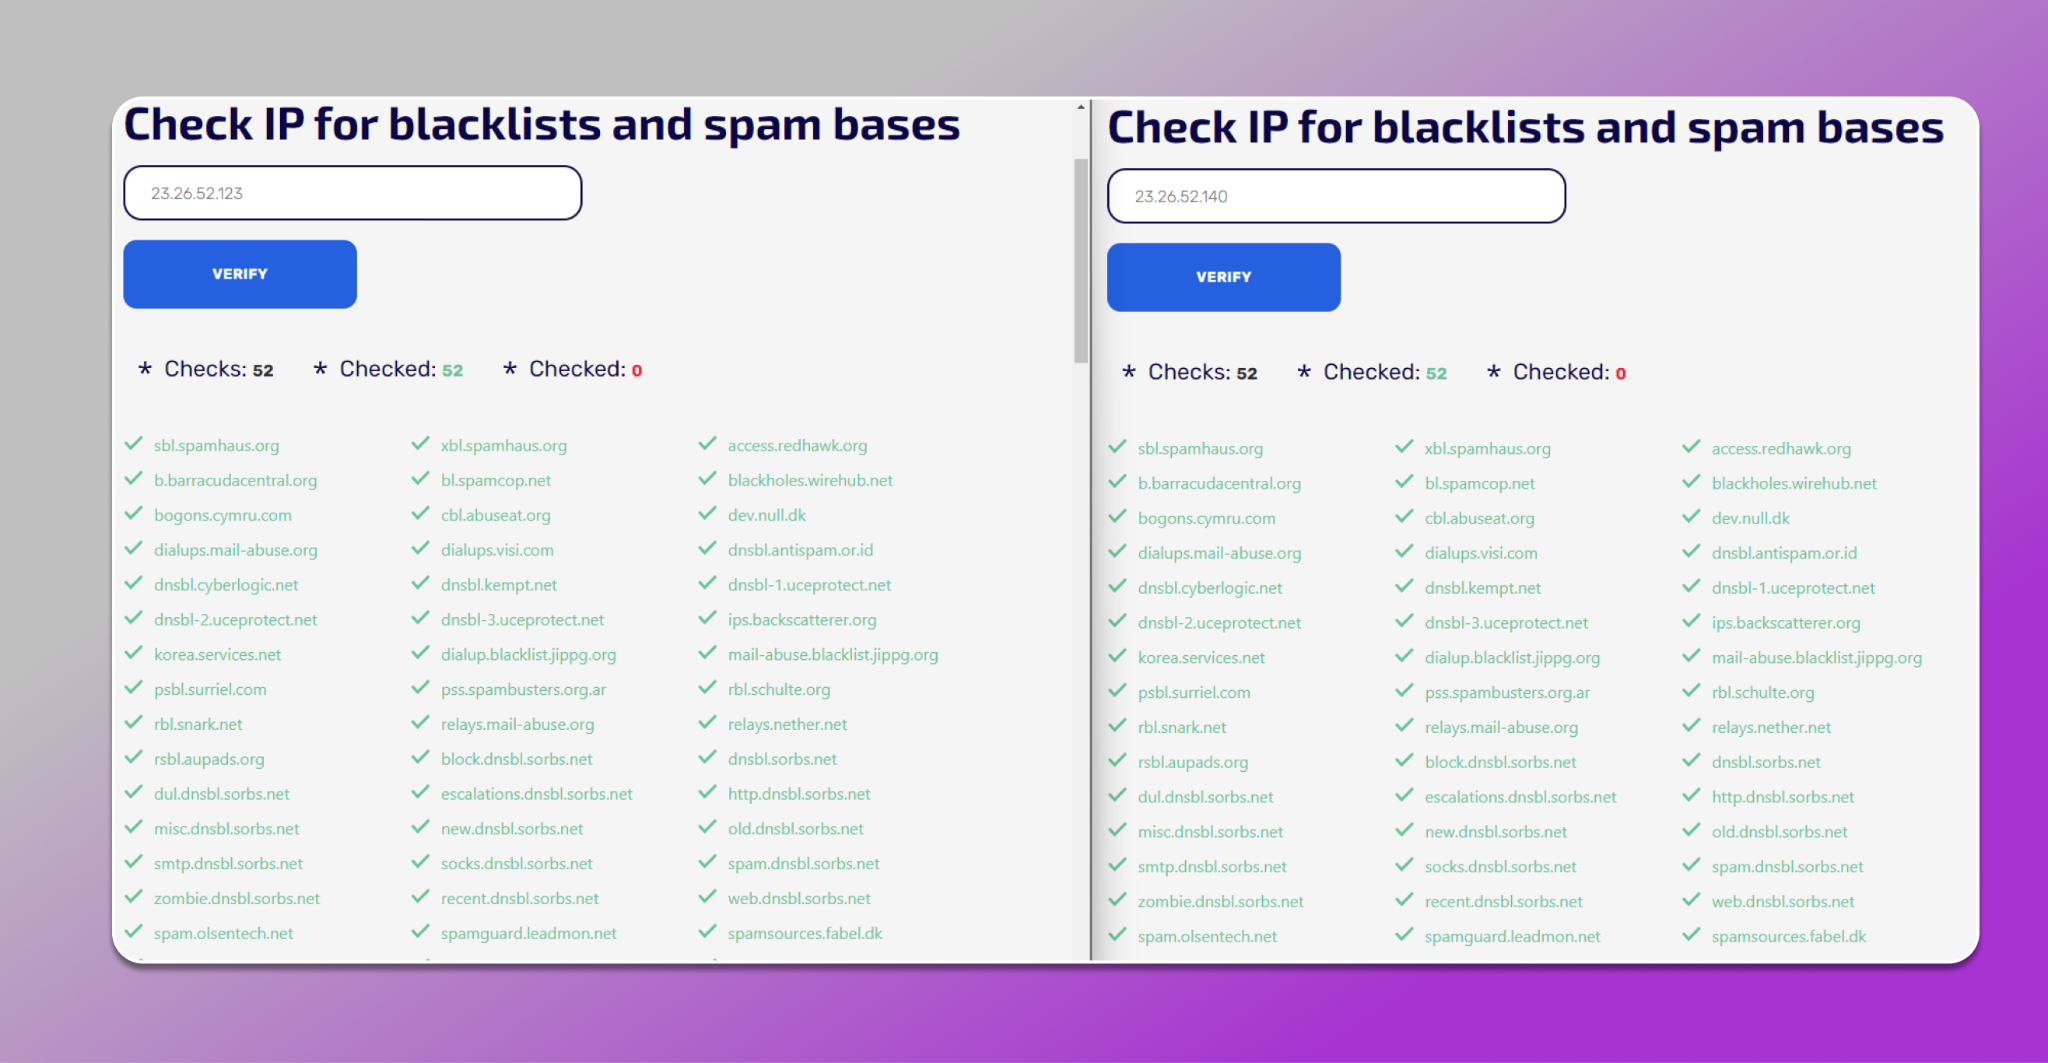 check in spam databases and blacklists